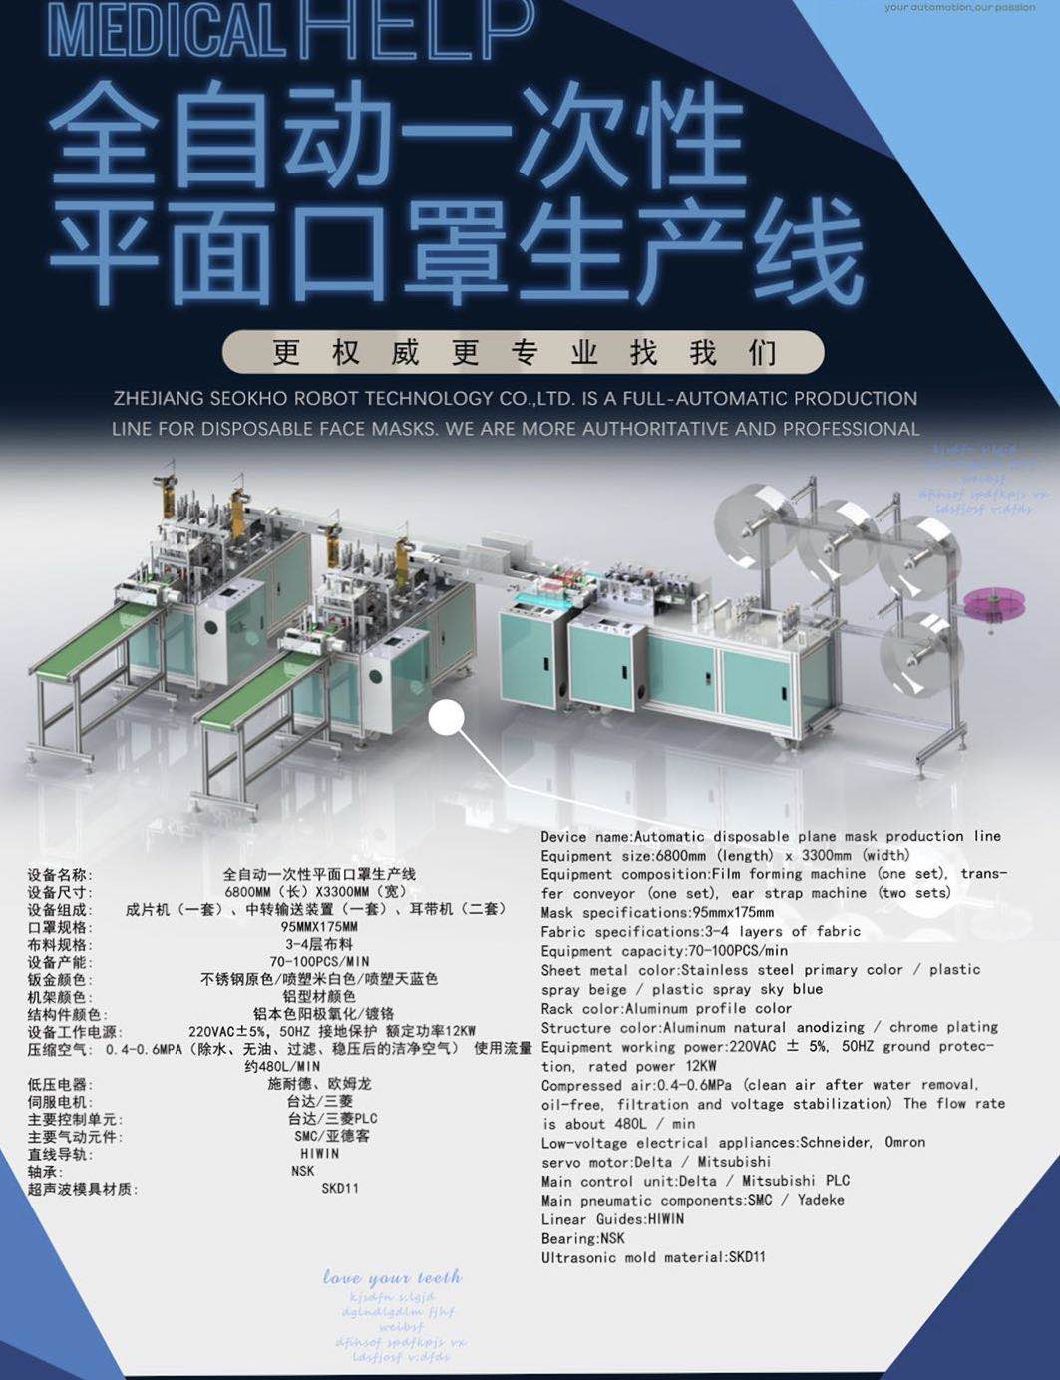 Full Automatic Advanced Disposable Plane Face Mask Machine with Product Line